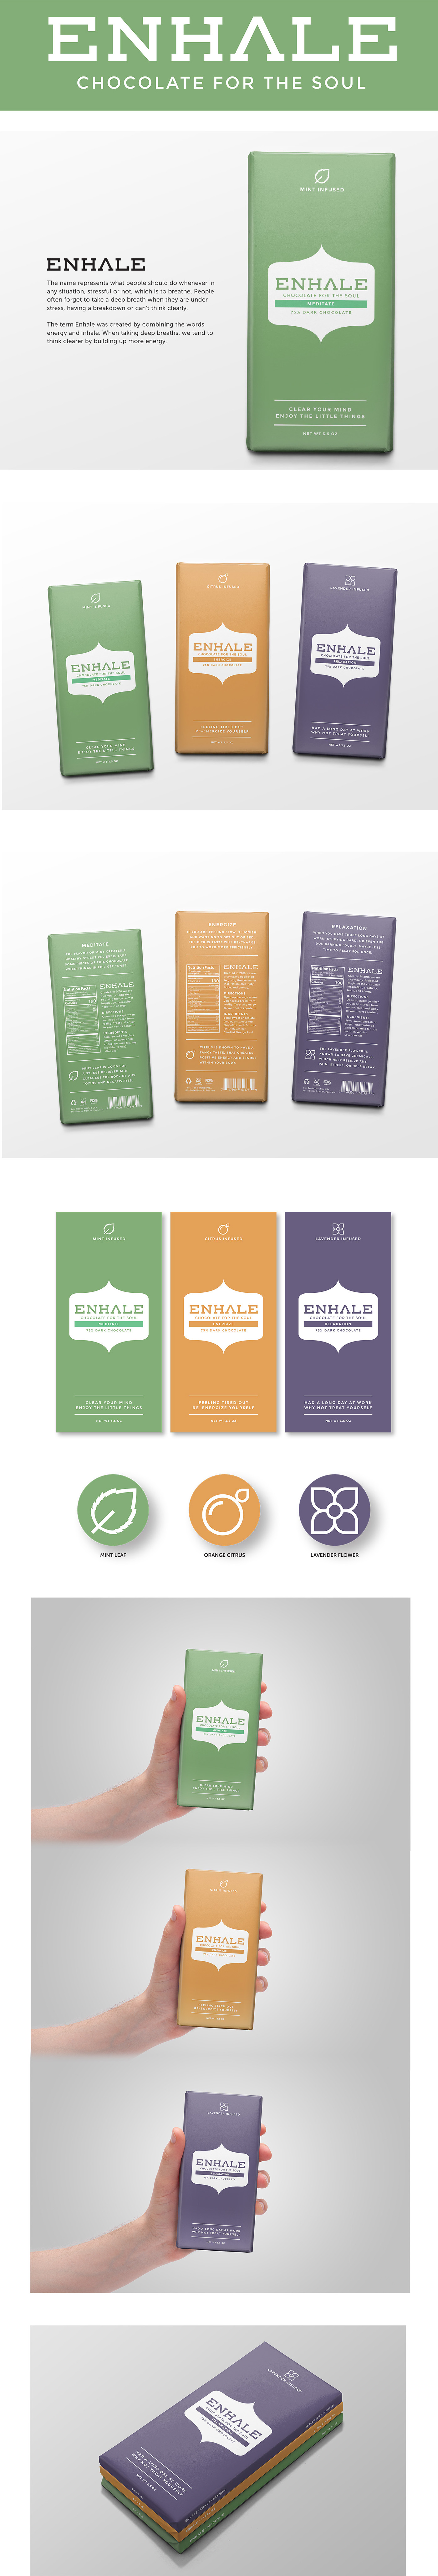 Enhale chocolate bars Packaging Nature therapeutic chocolate graphic design  meditate relaxation Energize